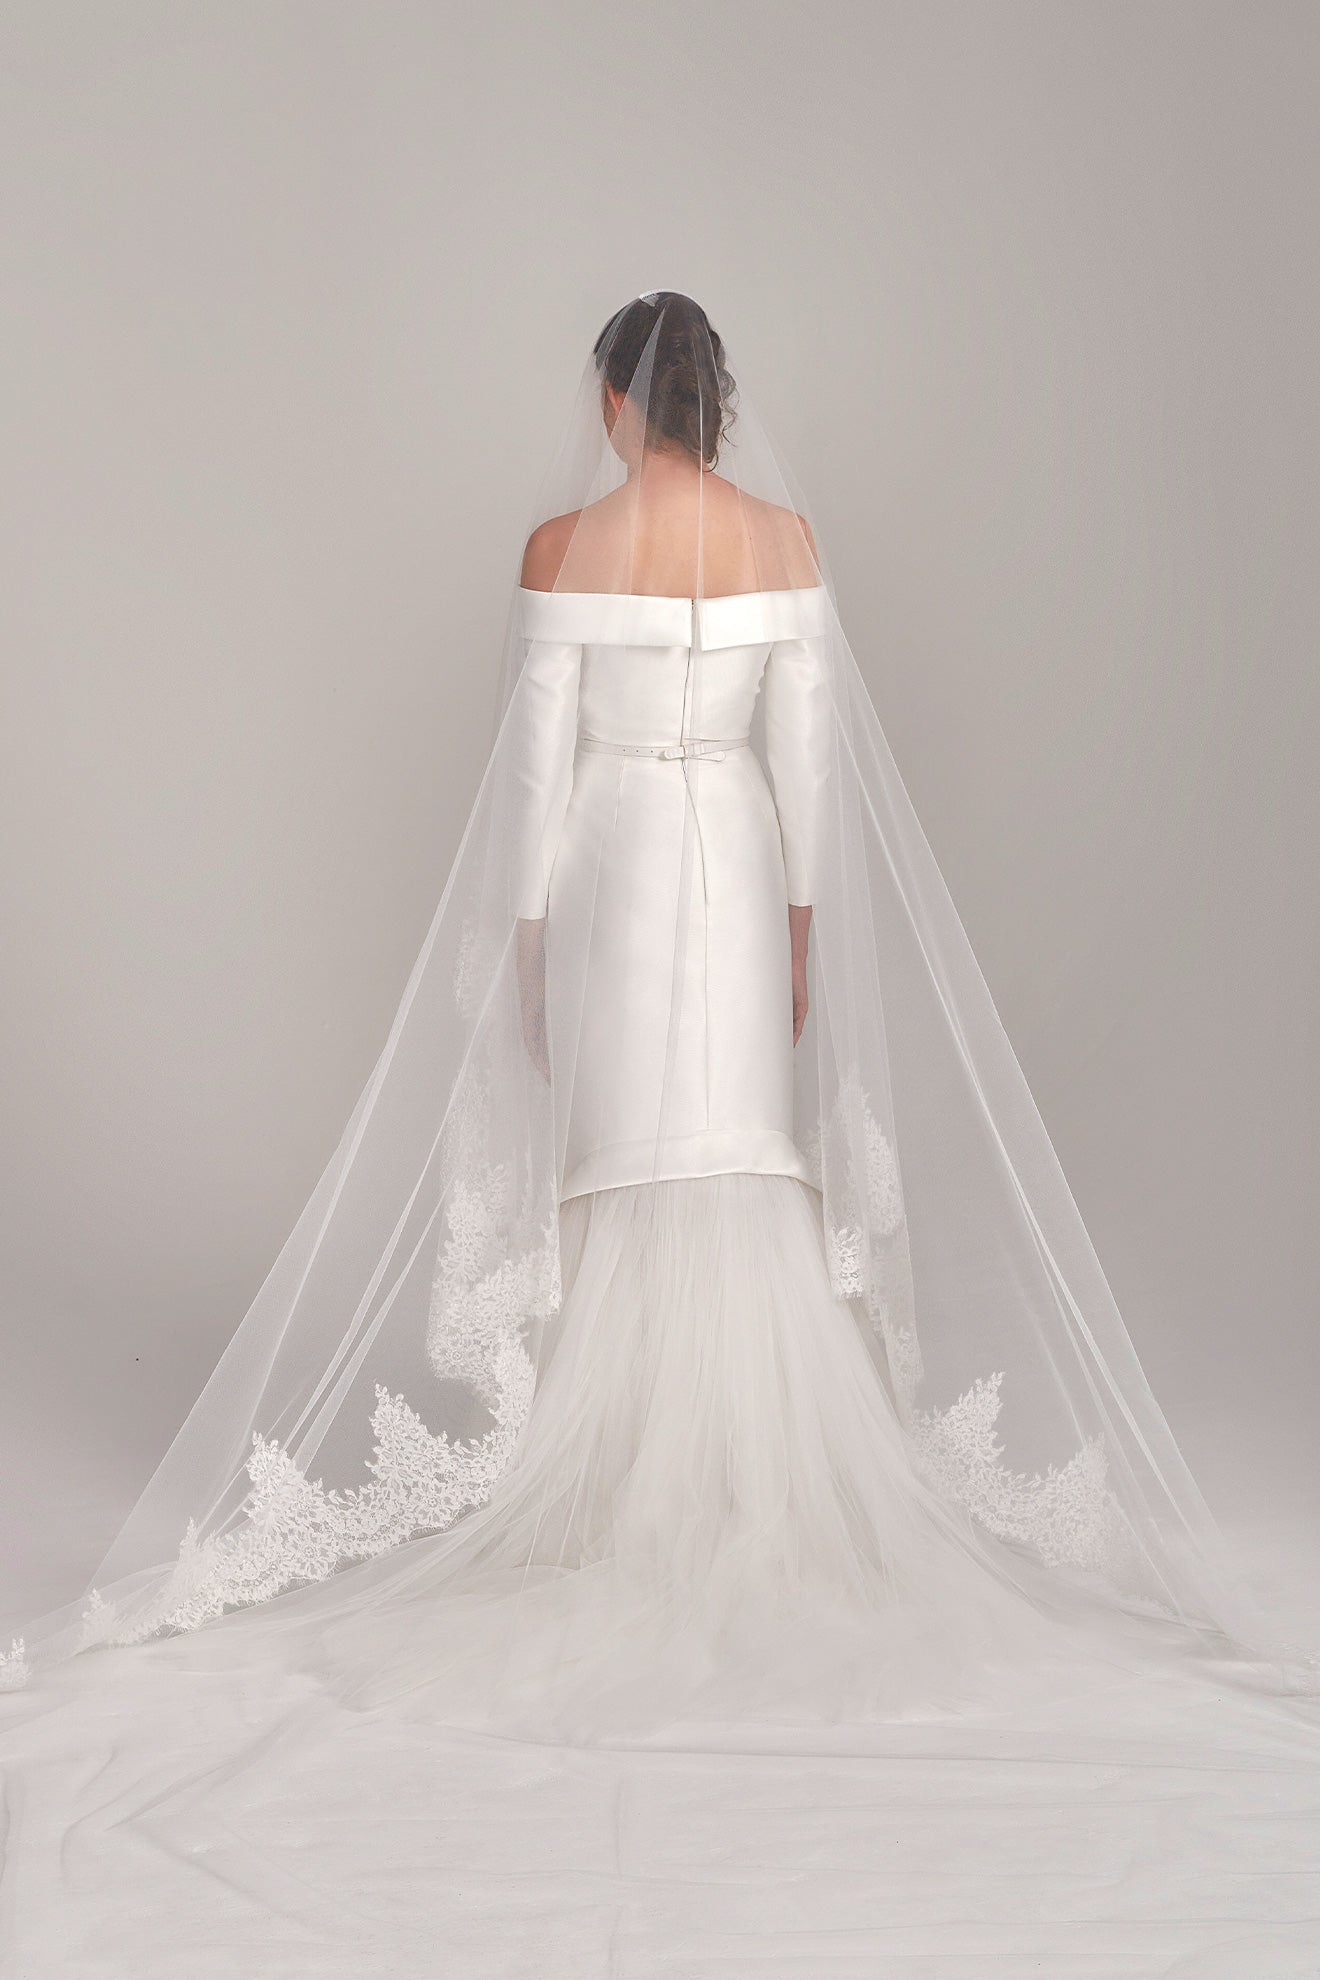 SNOW WHITE TULLE VEIL WITH LACE BORDER